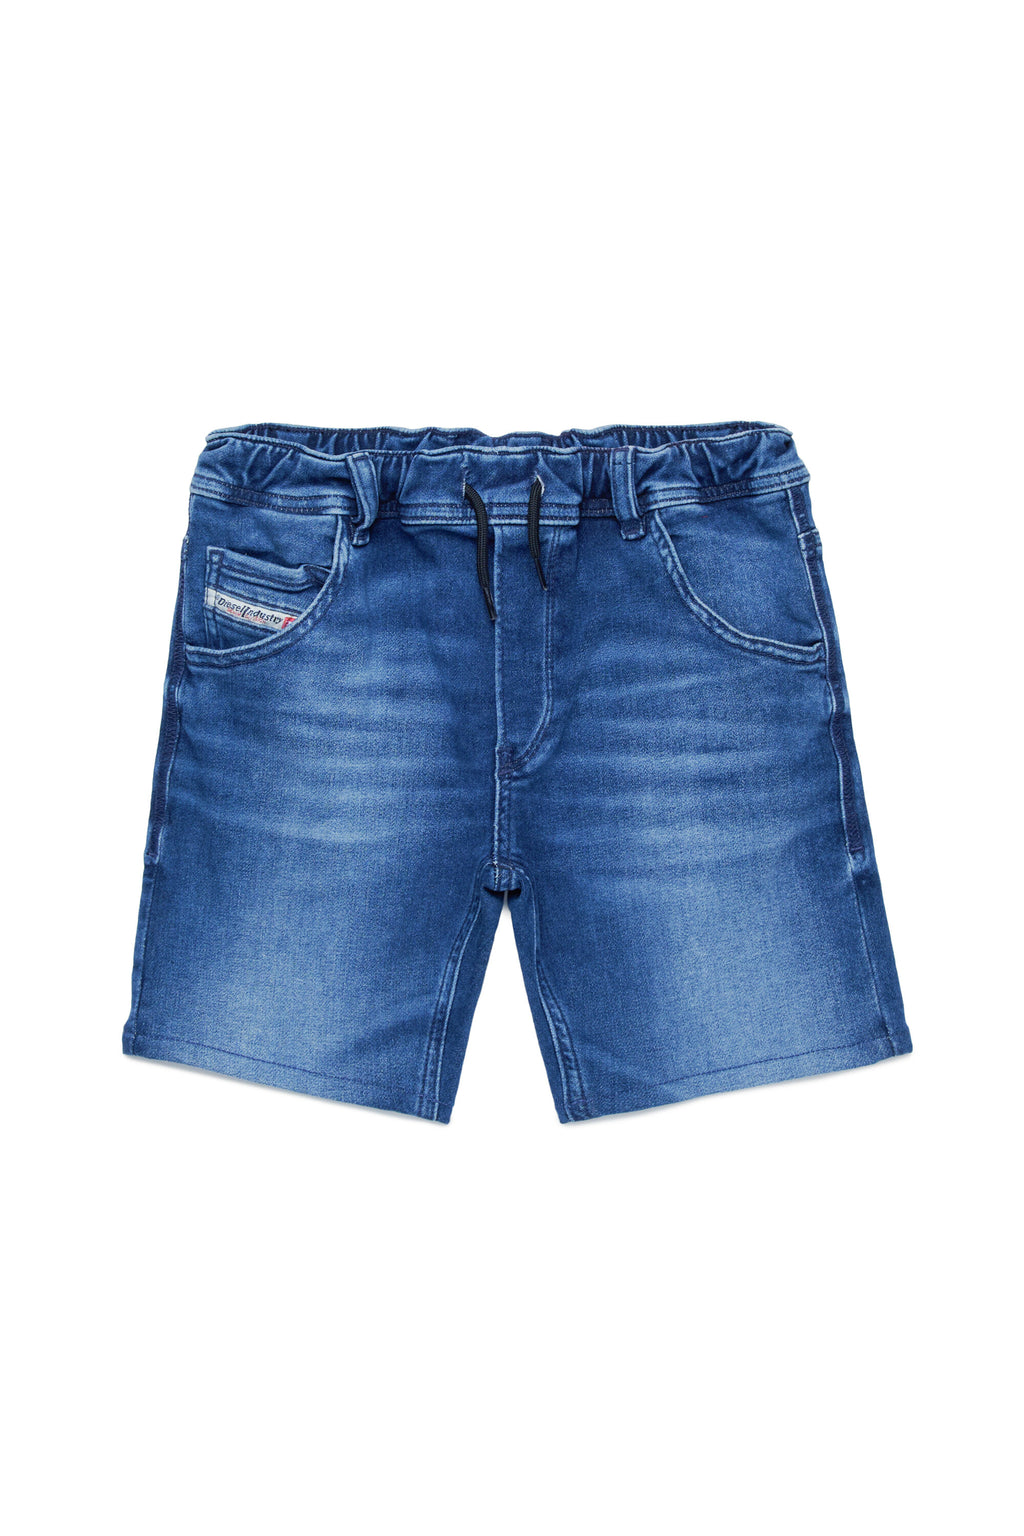 JoggJeans® shorts in mid-blue with shades